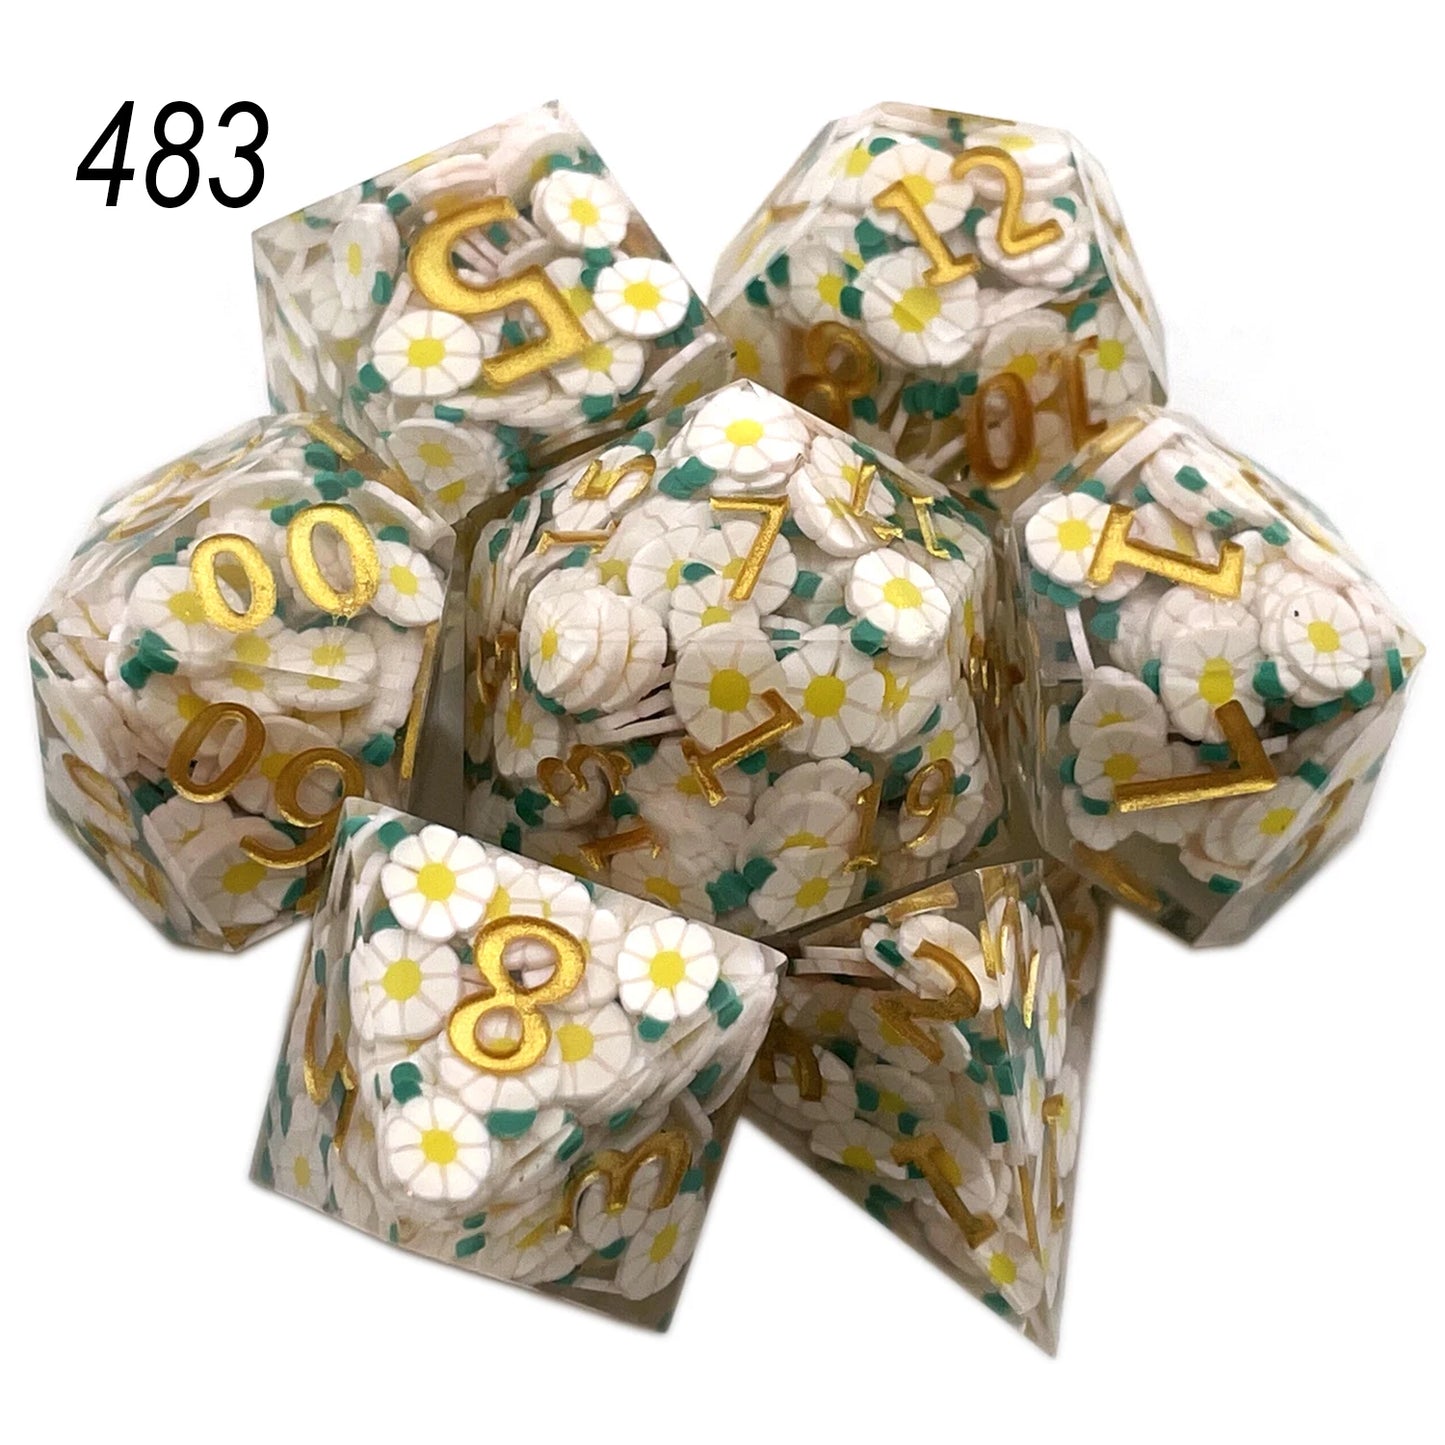 Solid Polyhedral Dice for Role Playing, Resin Dice, Dragon Scale, D, Rpg, Rol, Pathfinder, Board Game, Gifts, 7PCs, 2023 483